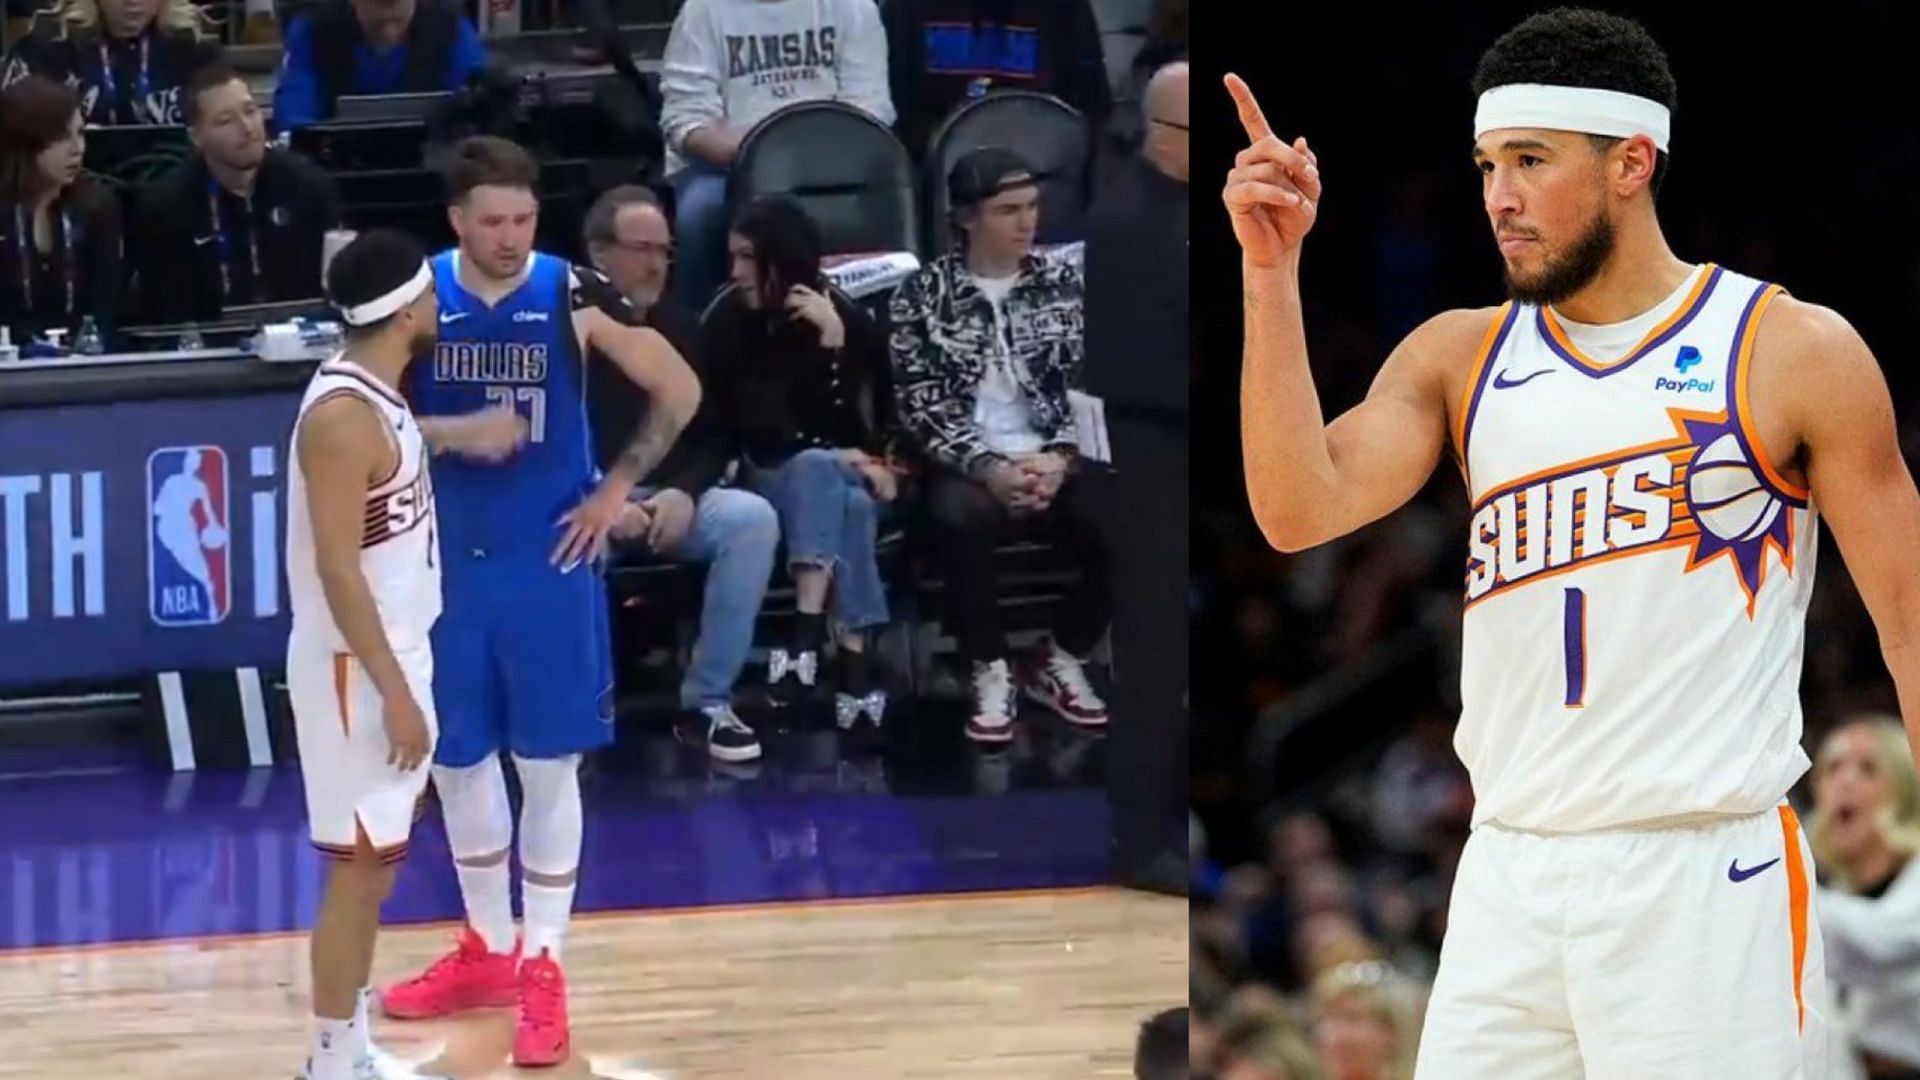 &quot;Congratulations on your daughter bro&quot;: Devin Booker with a wholesome line to Luka Doncic